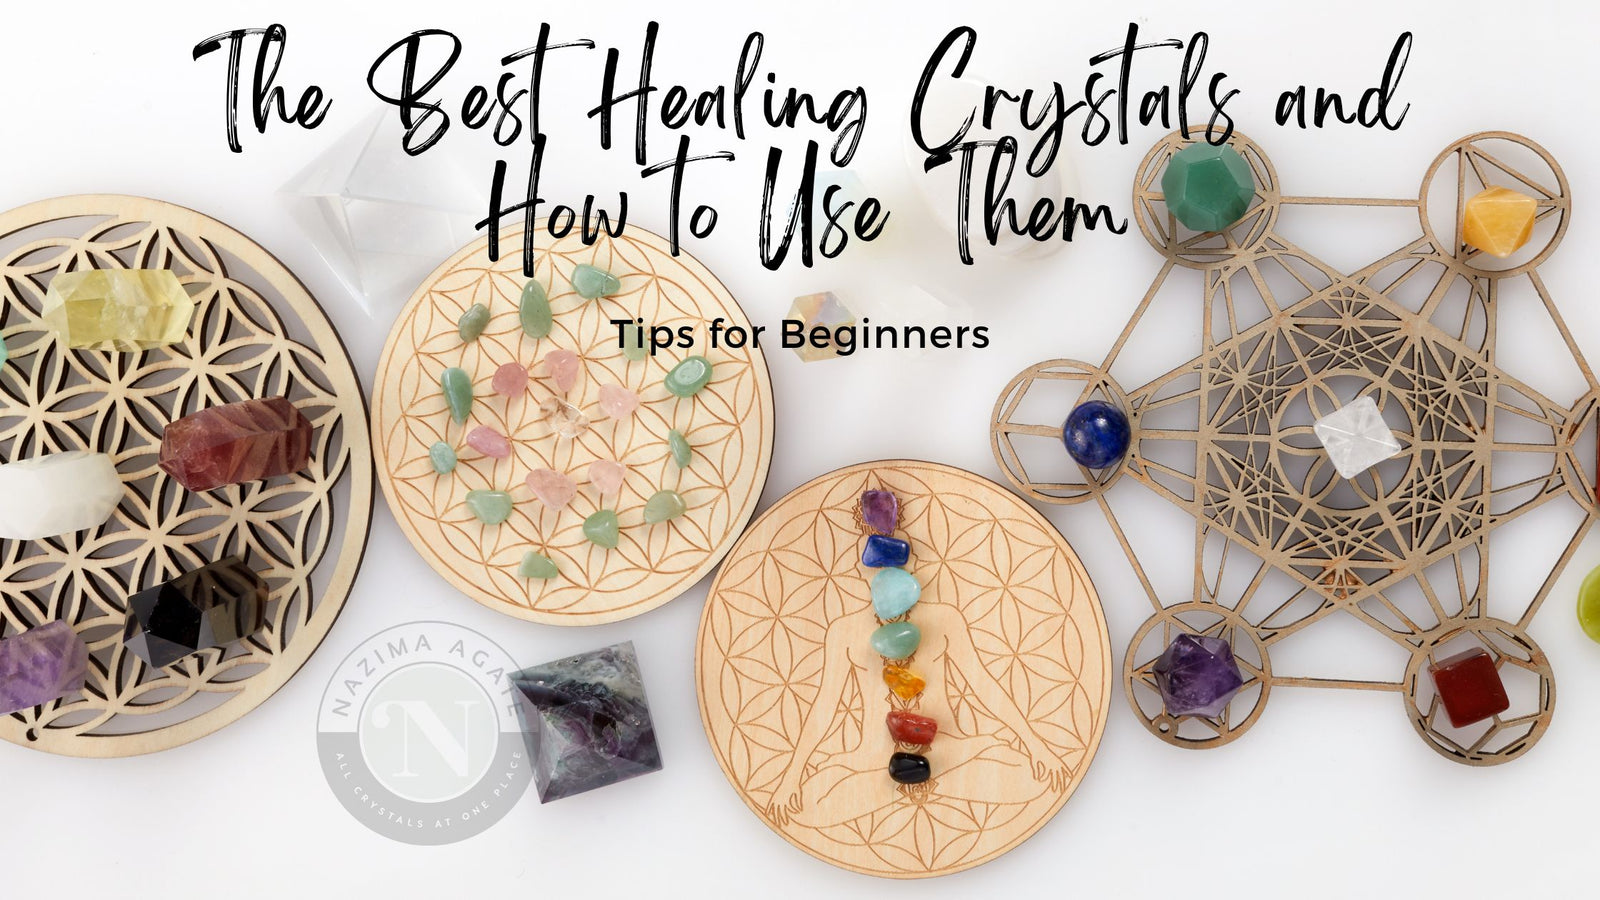 Best Healing Crystals and How to Use Them